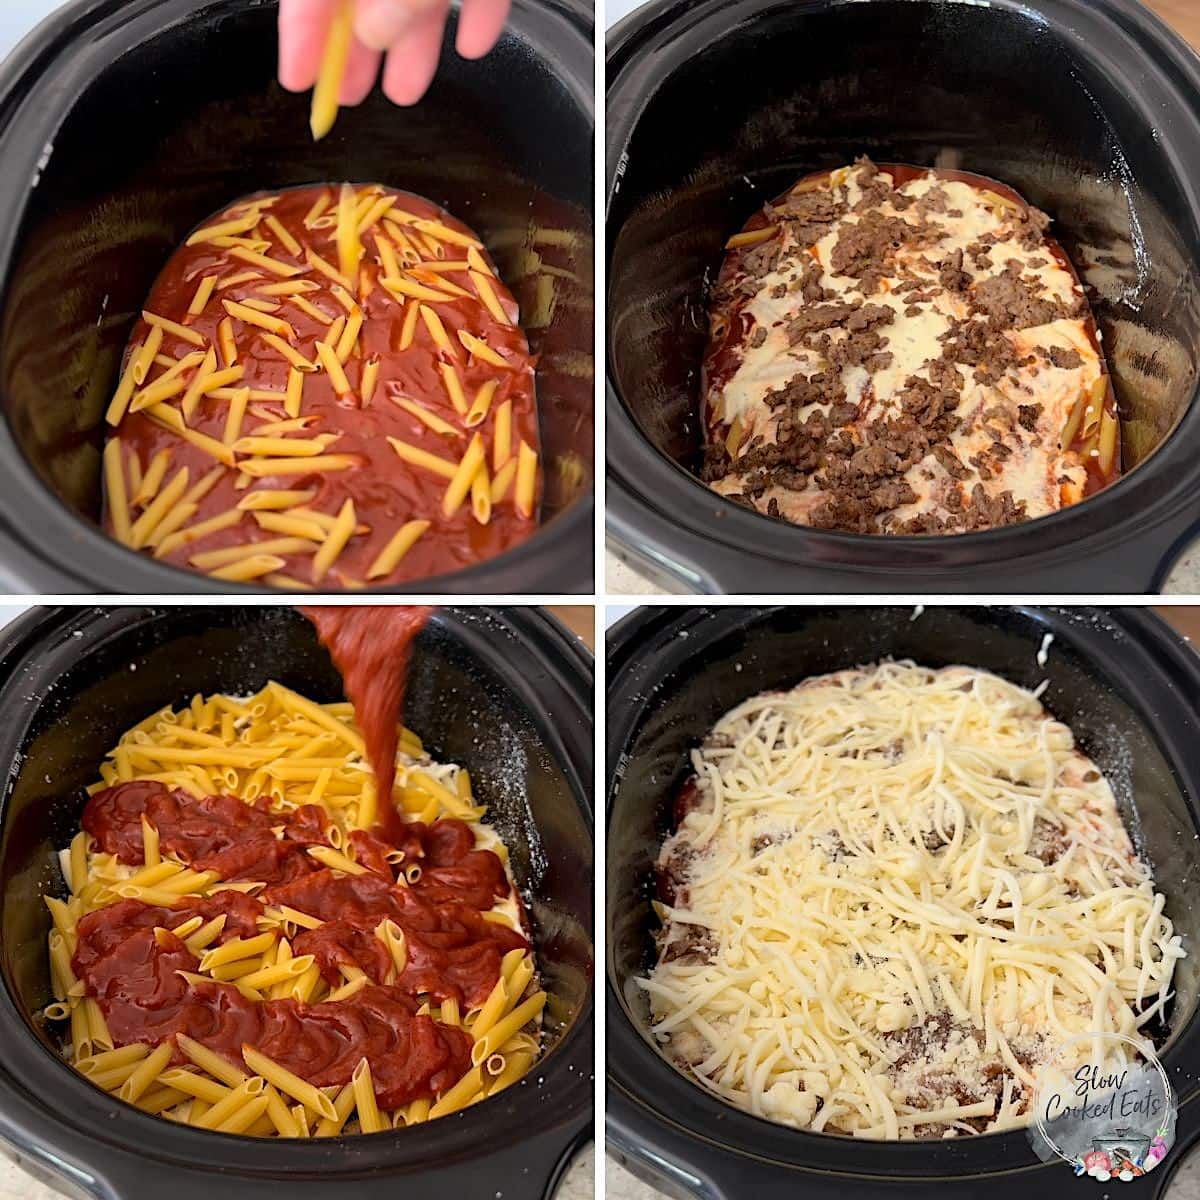 Layering the ingredients in a slow cooker to make baked ziti in crock pot.